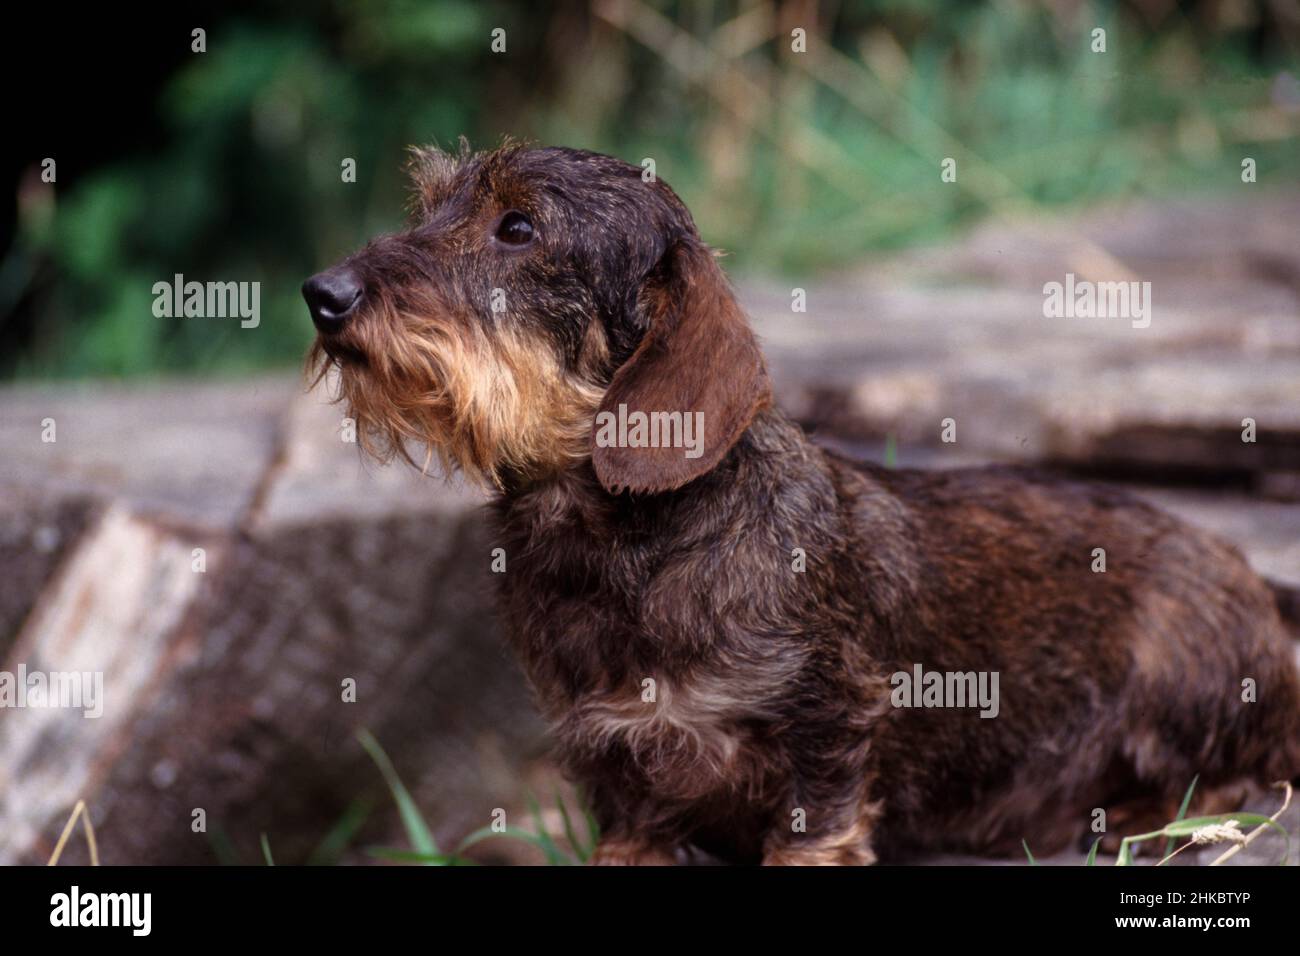 Miniature wire haired dachshund portrait standing on log. Stock Photo